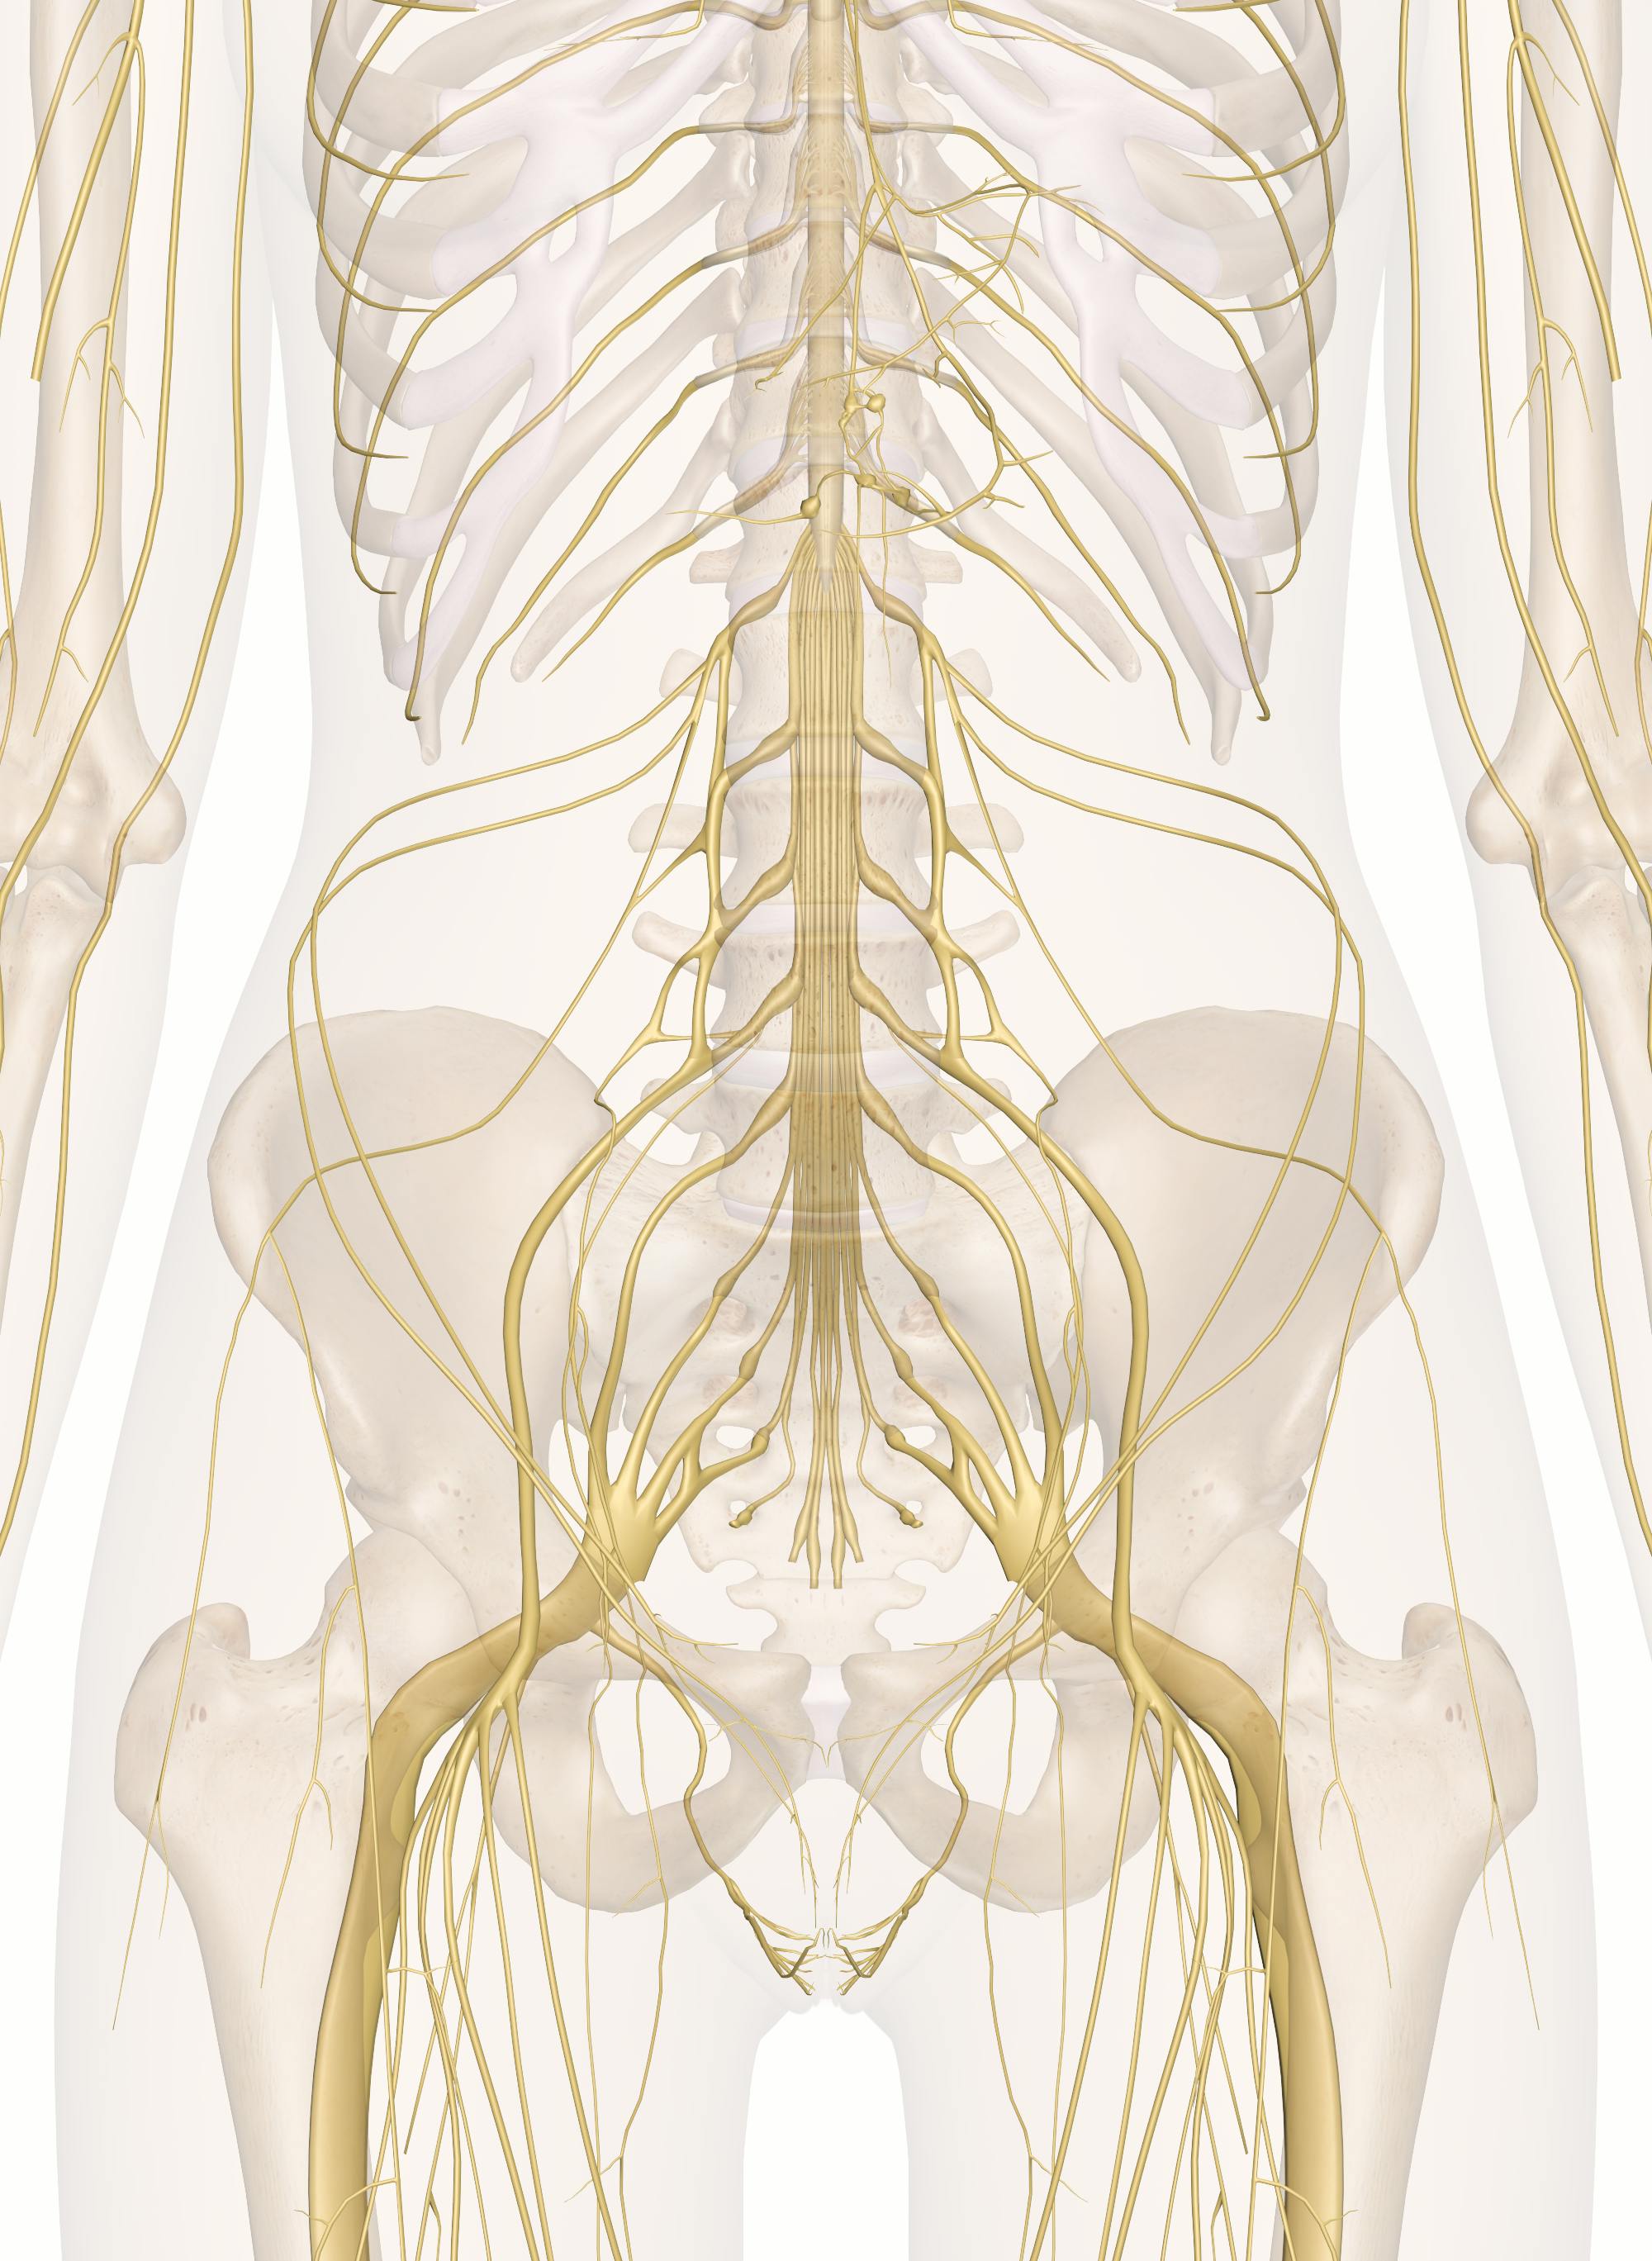 The Bones of the Pelvis and Lower Back: 3D Anatomy Model